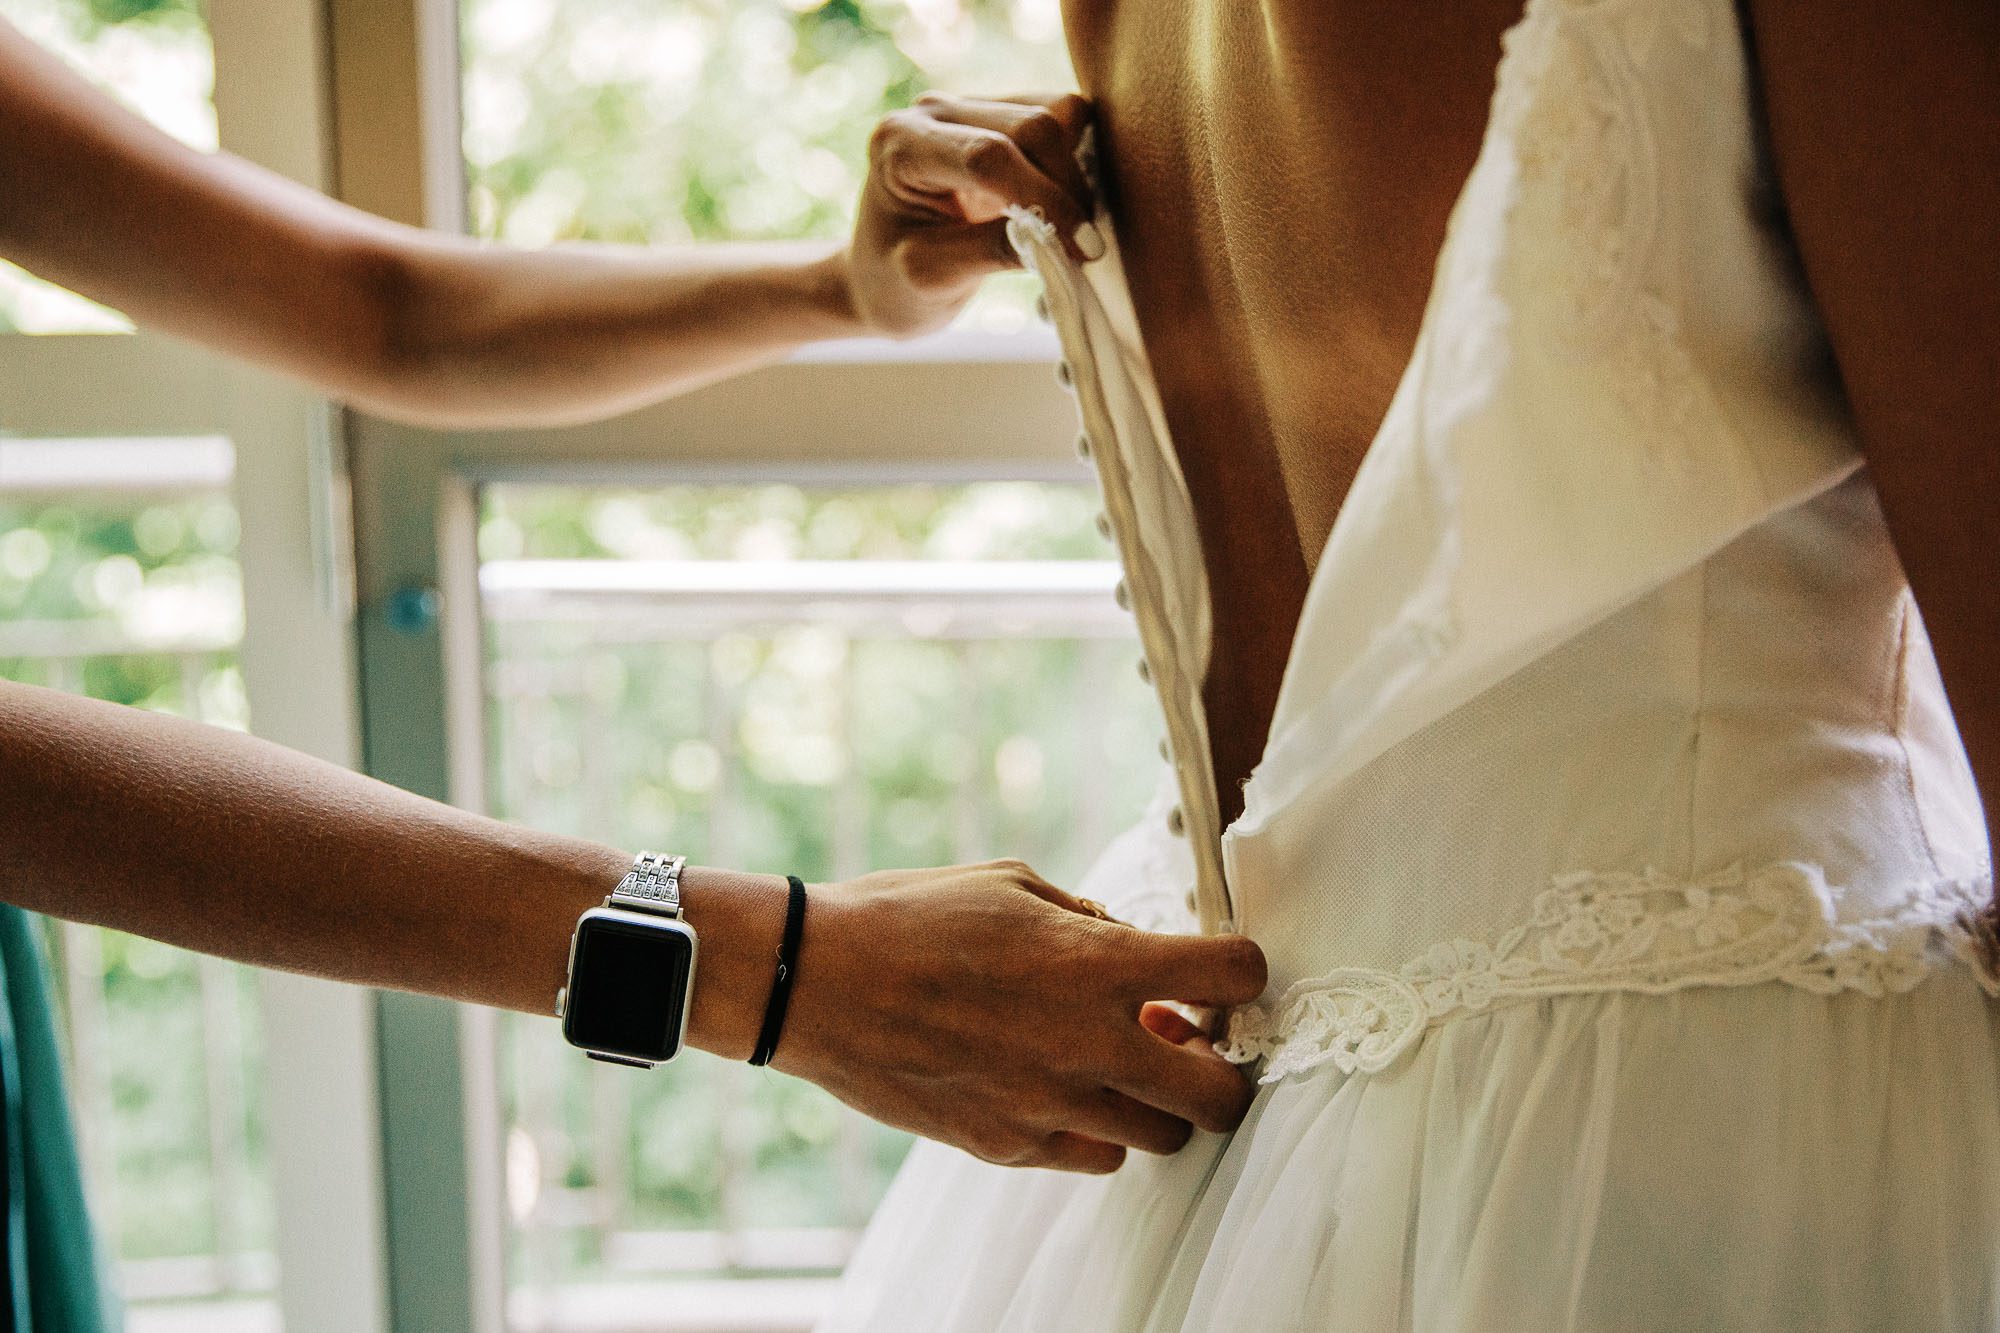 A close-up of the hand of the maid of honor buttoning the white wedding dress of the bride